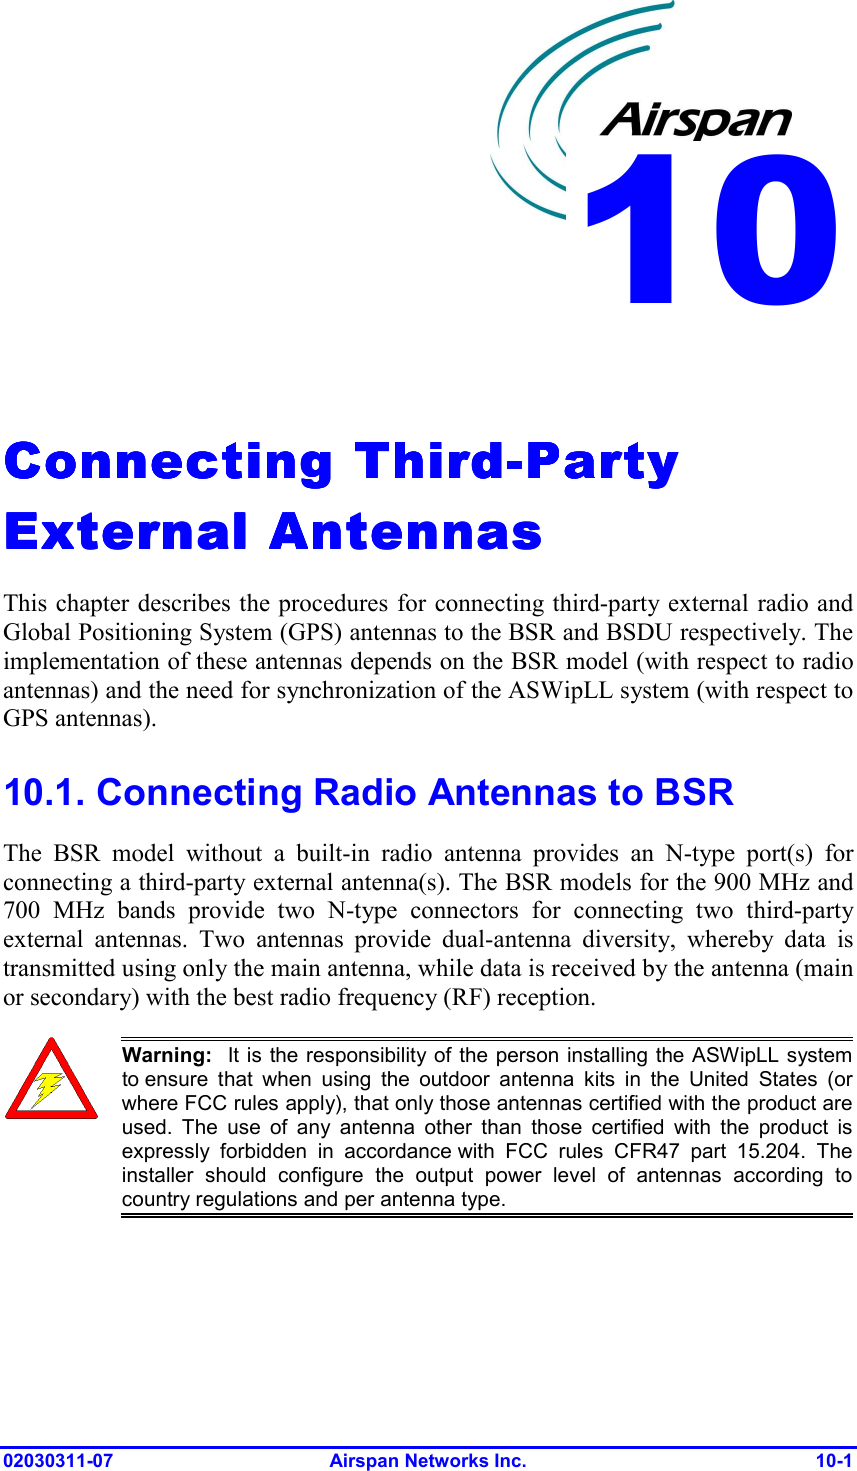  02030311-07 Airspan Networks Inc.  10-1   Connecting ThirdConnecting ThirdConnecting ThirdConnecting Third----Party Party Party Party External AntennasExternal AntennasExternal AntennasExternal Antennas    This chapter describes the procedures for connecting third-party external radio and Global Positioning System (GPS) antennas to the BSR and BSDU respectively. The implementation of these antennas depends on the BSR model (with respect to radio antennas) and the need for synchronization of the ASWipLL system (with respect to GPS antennas).  10.1. Connecting Radio Antennas to BSR The BSR model without a built-in radio antenna provides an N-type port(s) for connecting a third-party external antenna(s). The BSR models for the 900 MHz and 700 MHz bands provide two N-type connectors for connecting two third-party external antennas. Two antennas provide dual-antenna diversity, whereby data is transmitted using only the main antenna, while data is received by the antenna (main or secondary) with the best radio frequency (RF) reception.   Warning:  It is the responsibility of the person installing the ASWipLL systemto ensure that when using the outdoor antenna kits in the United States (or where FCC rules apply), that only those antennas certified with the product areused. The use of any antenna other than those certified with the product isexpressly forbidden in accordance with FCC rules CFR47 part 15.204. The installer should configure the output power level of antennas according tocountry regulations and per antenna type. 10